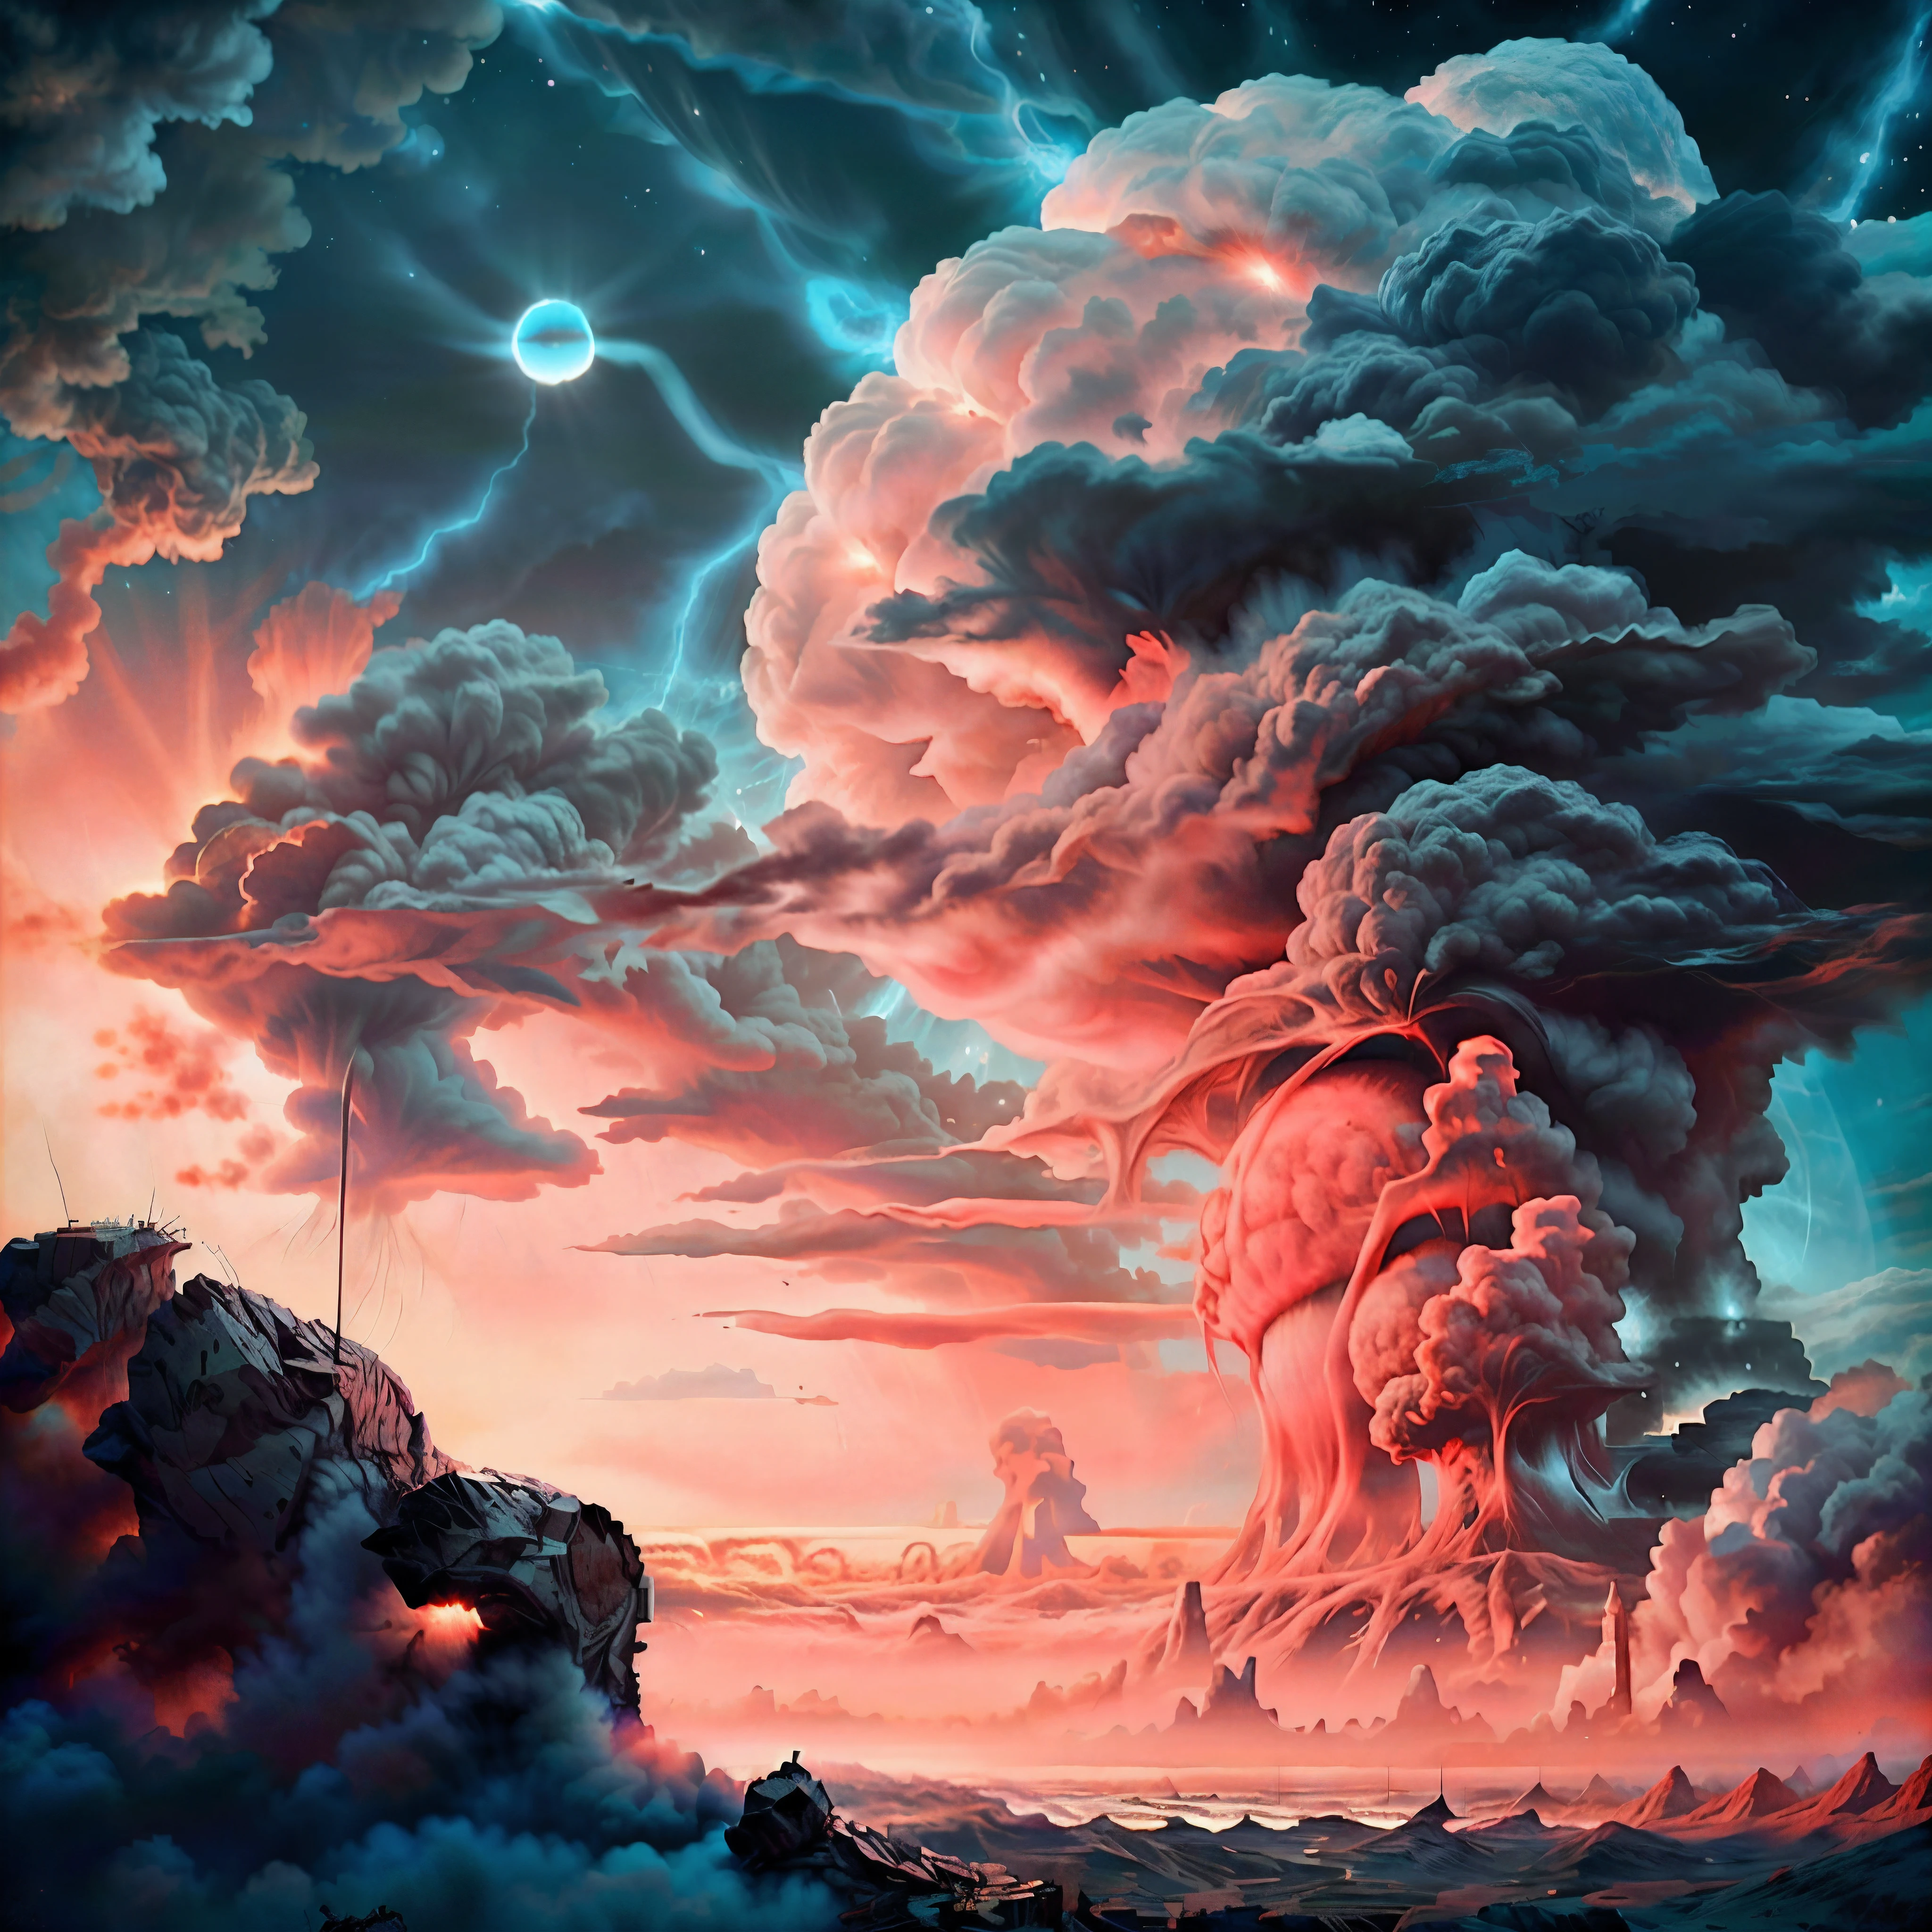 a hyper realistic close up of a nuclear explosion., a big cloud in the sky, conceptual art, nuclear cloud, Nuclear explosions paint the sky, Masterpiece, realism, Ruins, radiation in iridescent effects